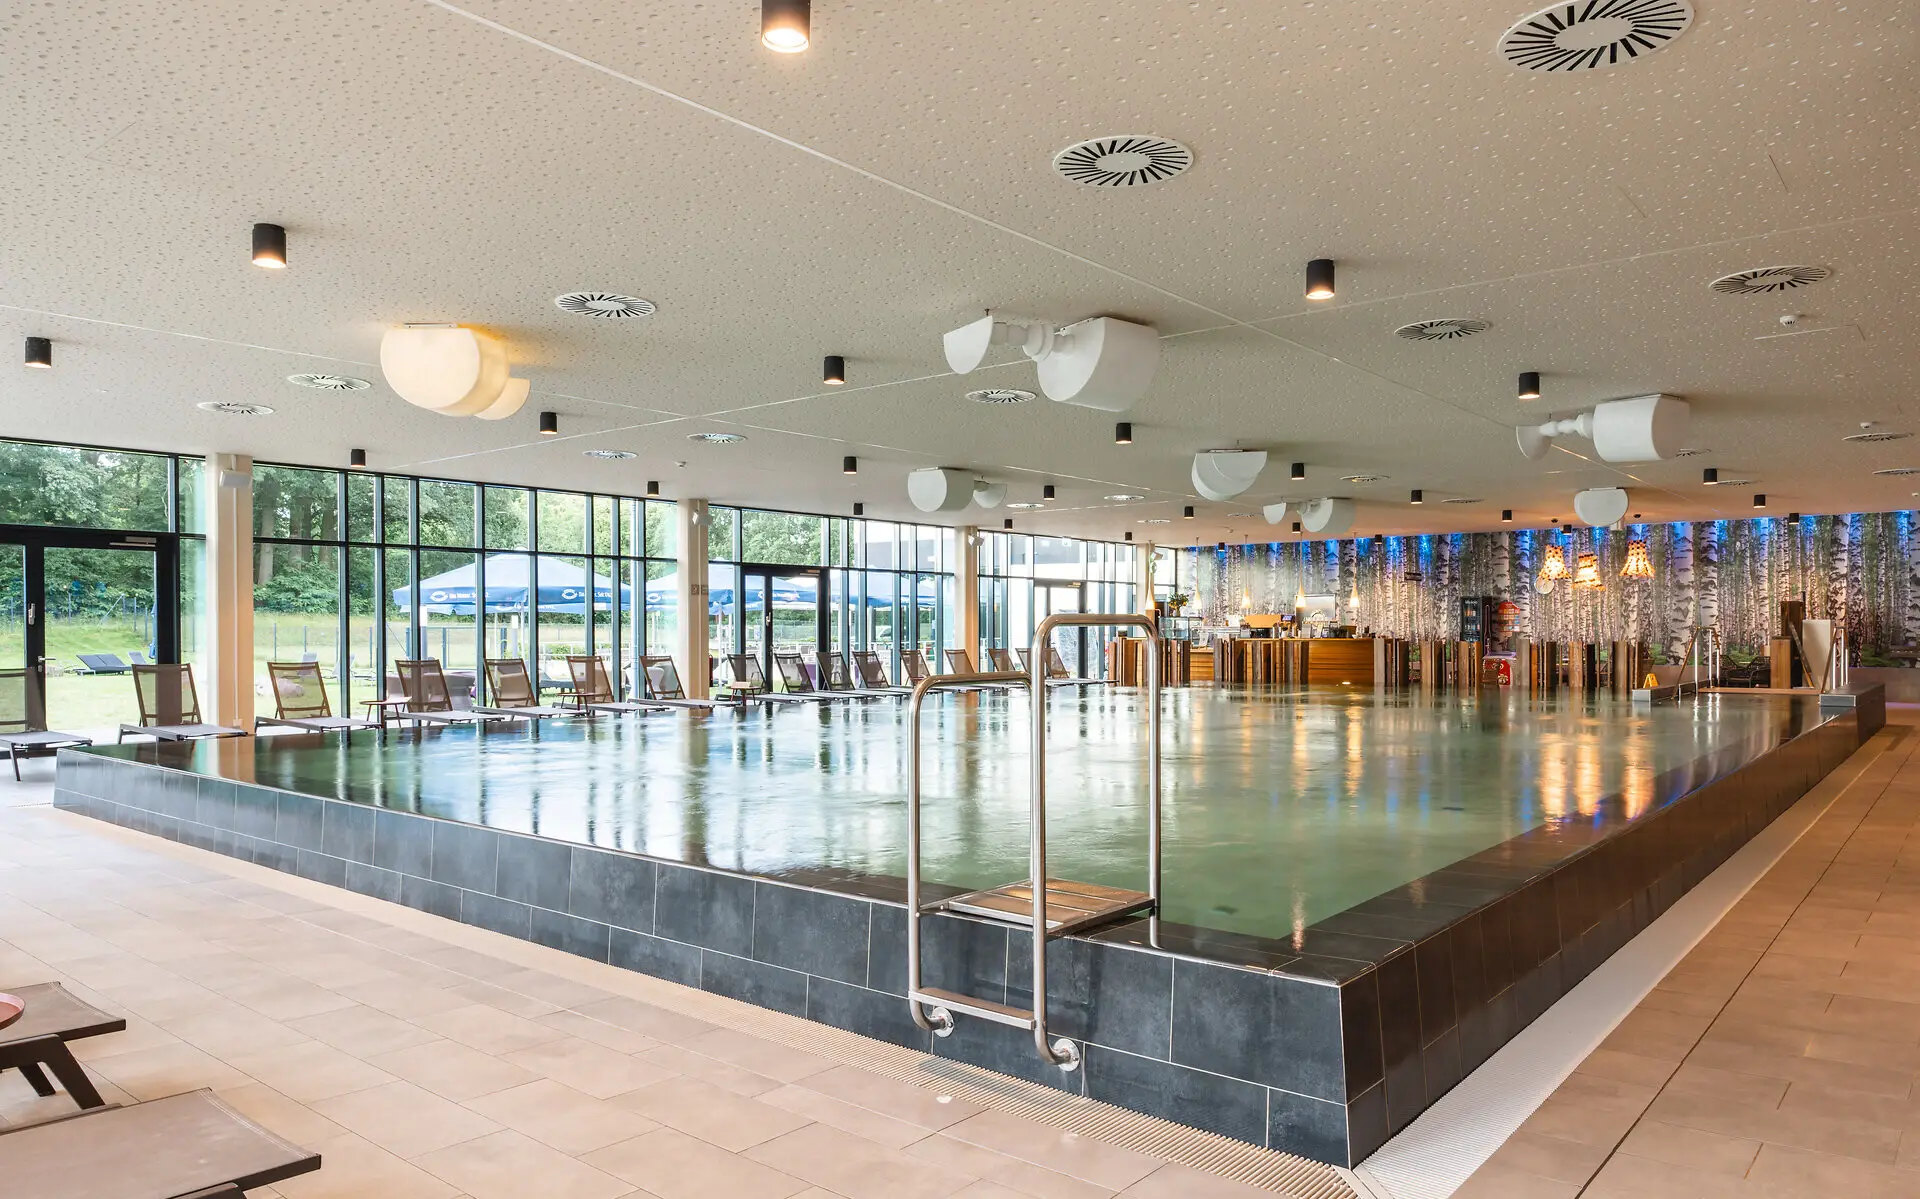 Large indoor swimming pool with a prominent railing and surrounding chairs.